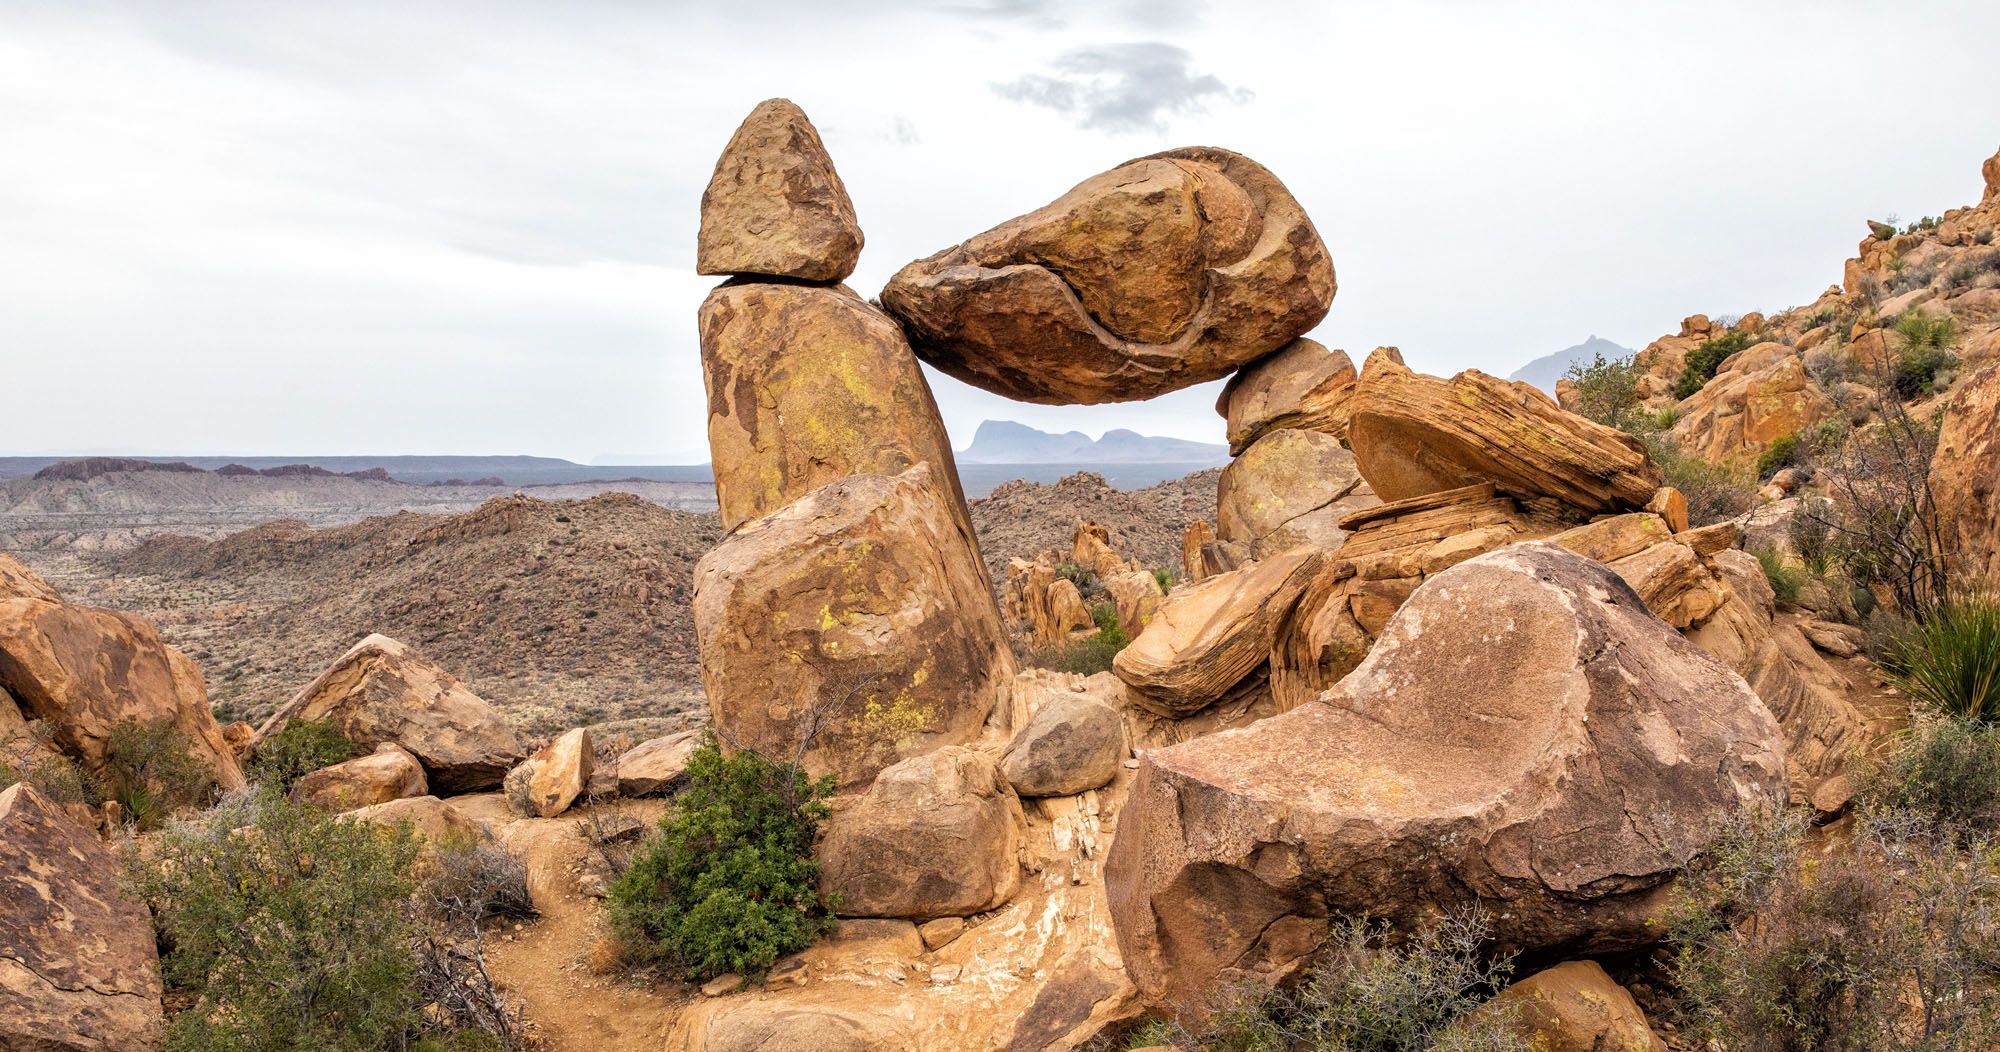 Featured image for “Balanced Rock Hike: A Short but Sweet Hike in Big Bend National Park”